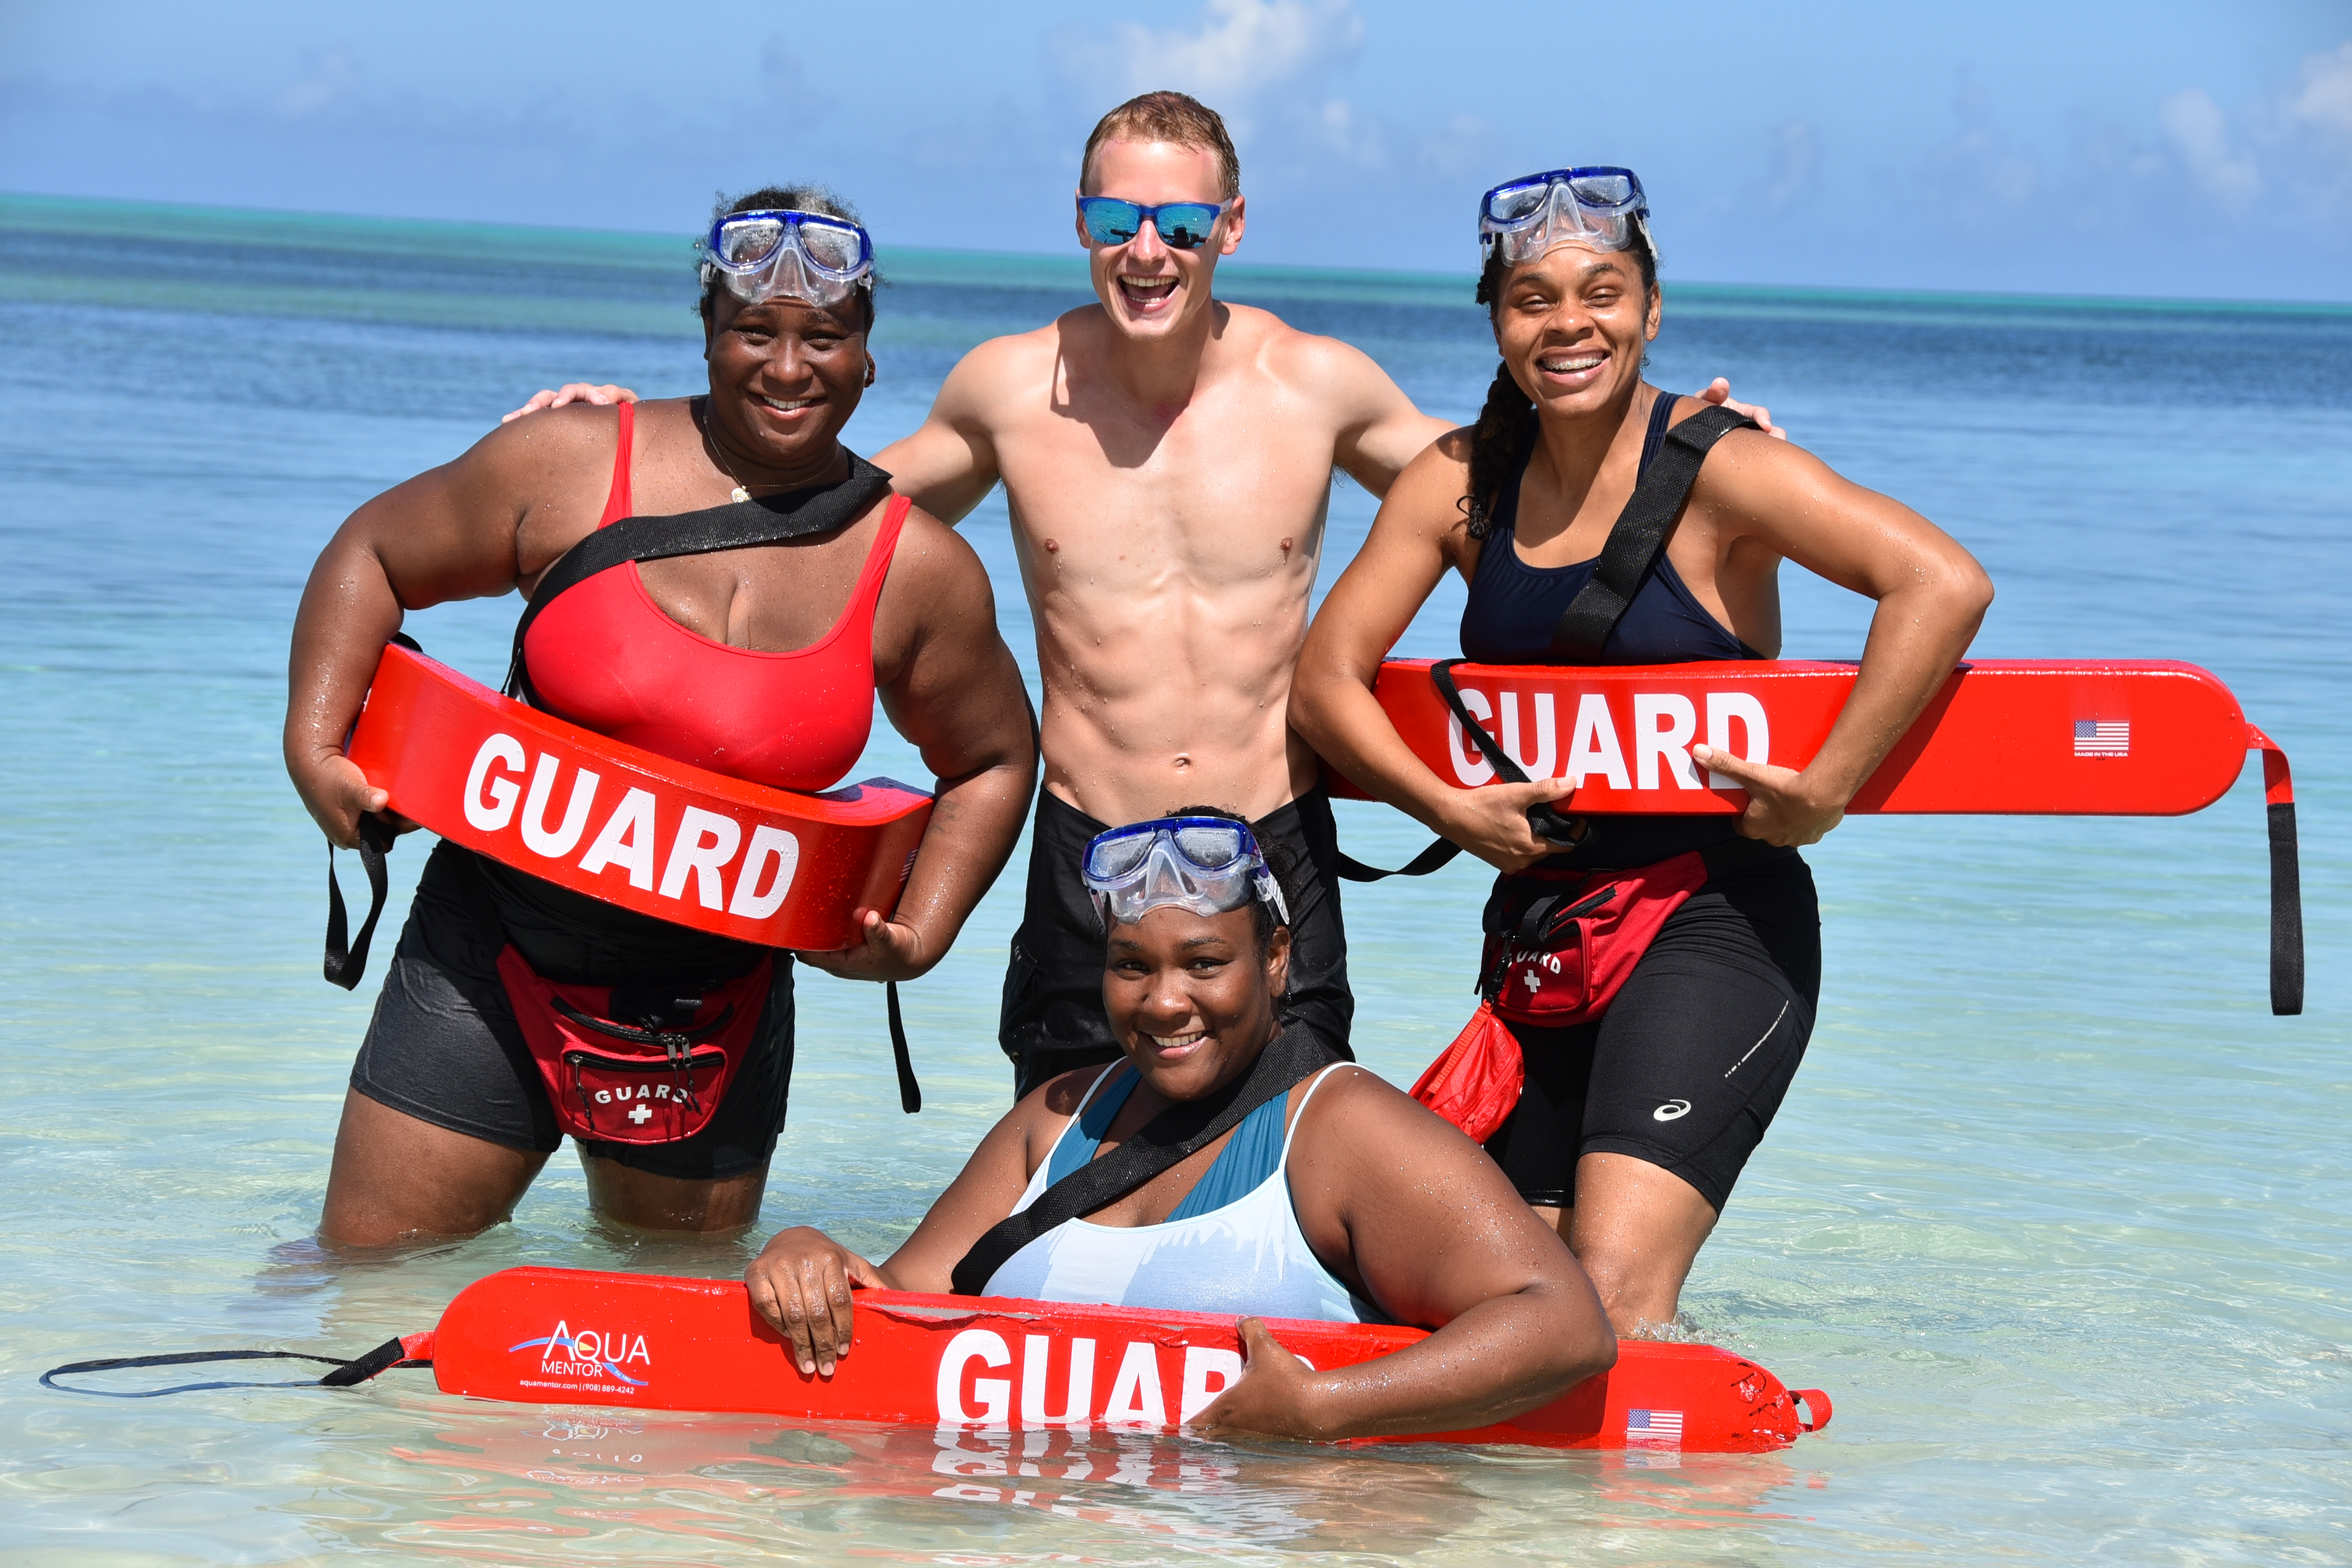 Collaborating to Bring Water Safety Skills & Lifeguard Opportunities to the Bahamas - red cross chat